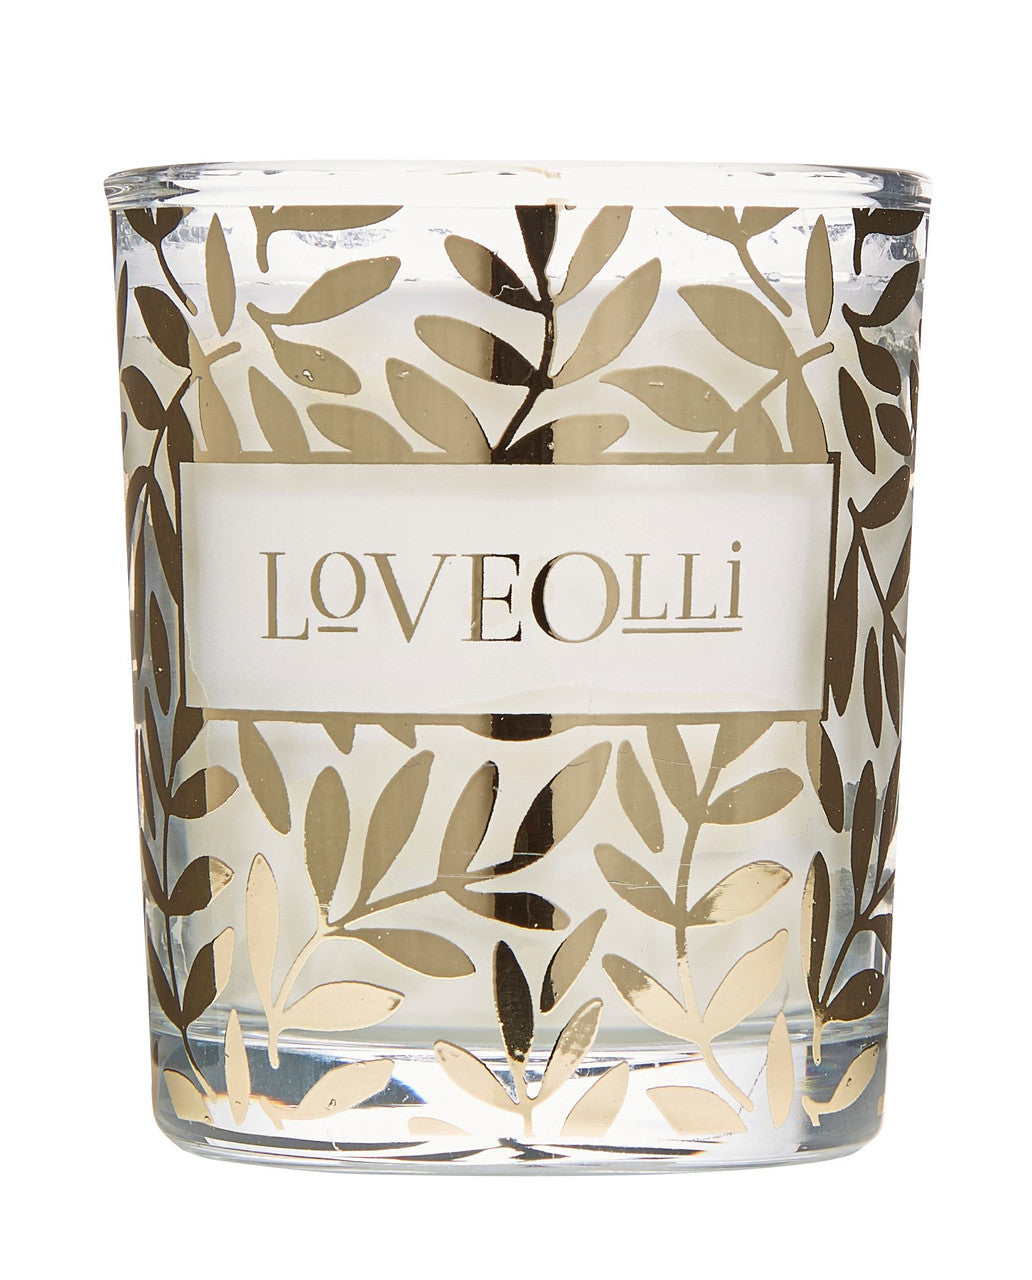 Love Olli Clean Cut Grass scented votive candle. Hand poured in the UK.